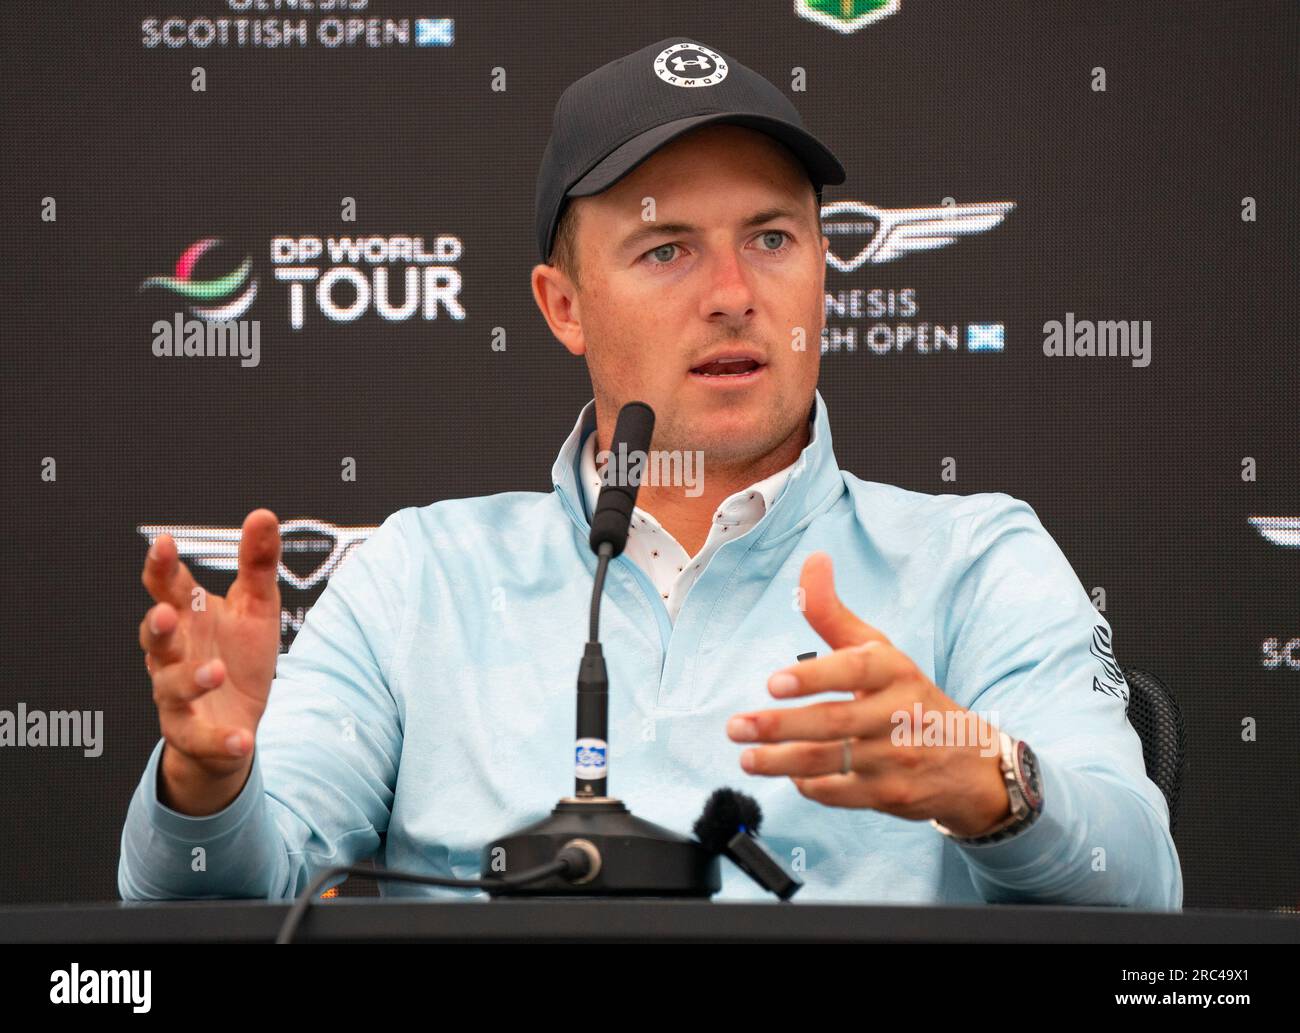 North Berwick, East Lothian, Scotland, UK. 12th July 2023. Jordan Spieth gives a press conference interview at the Genesis Scottish Open at the Renaissance Club in North Berwick.  Iain Masterton/Alamy Live News Stock Photo